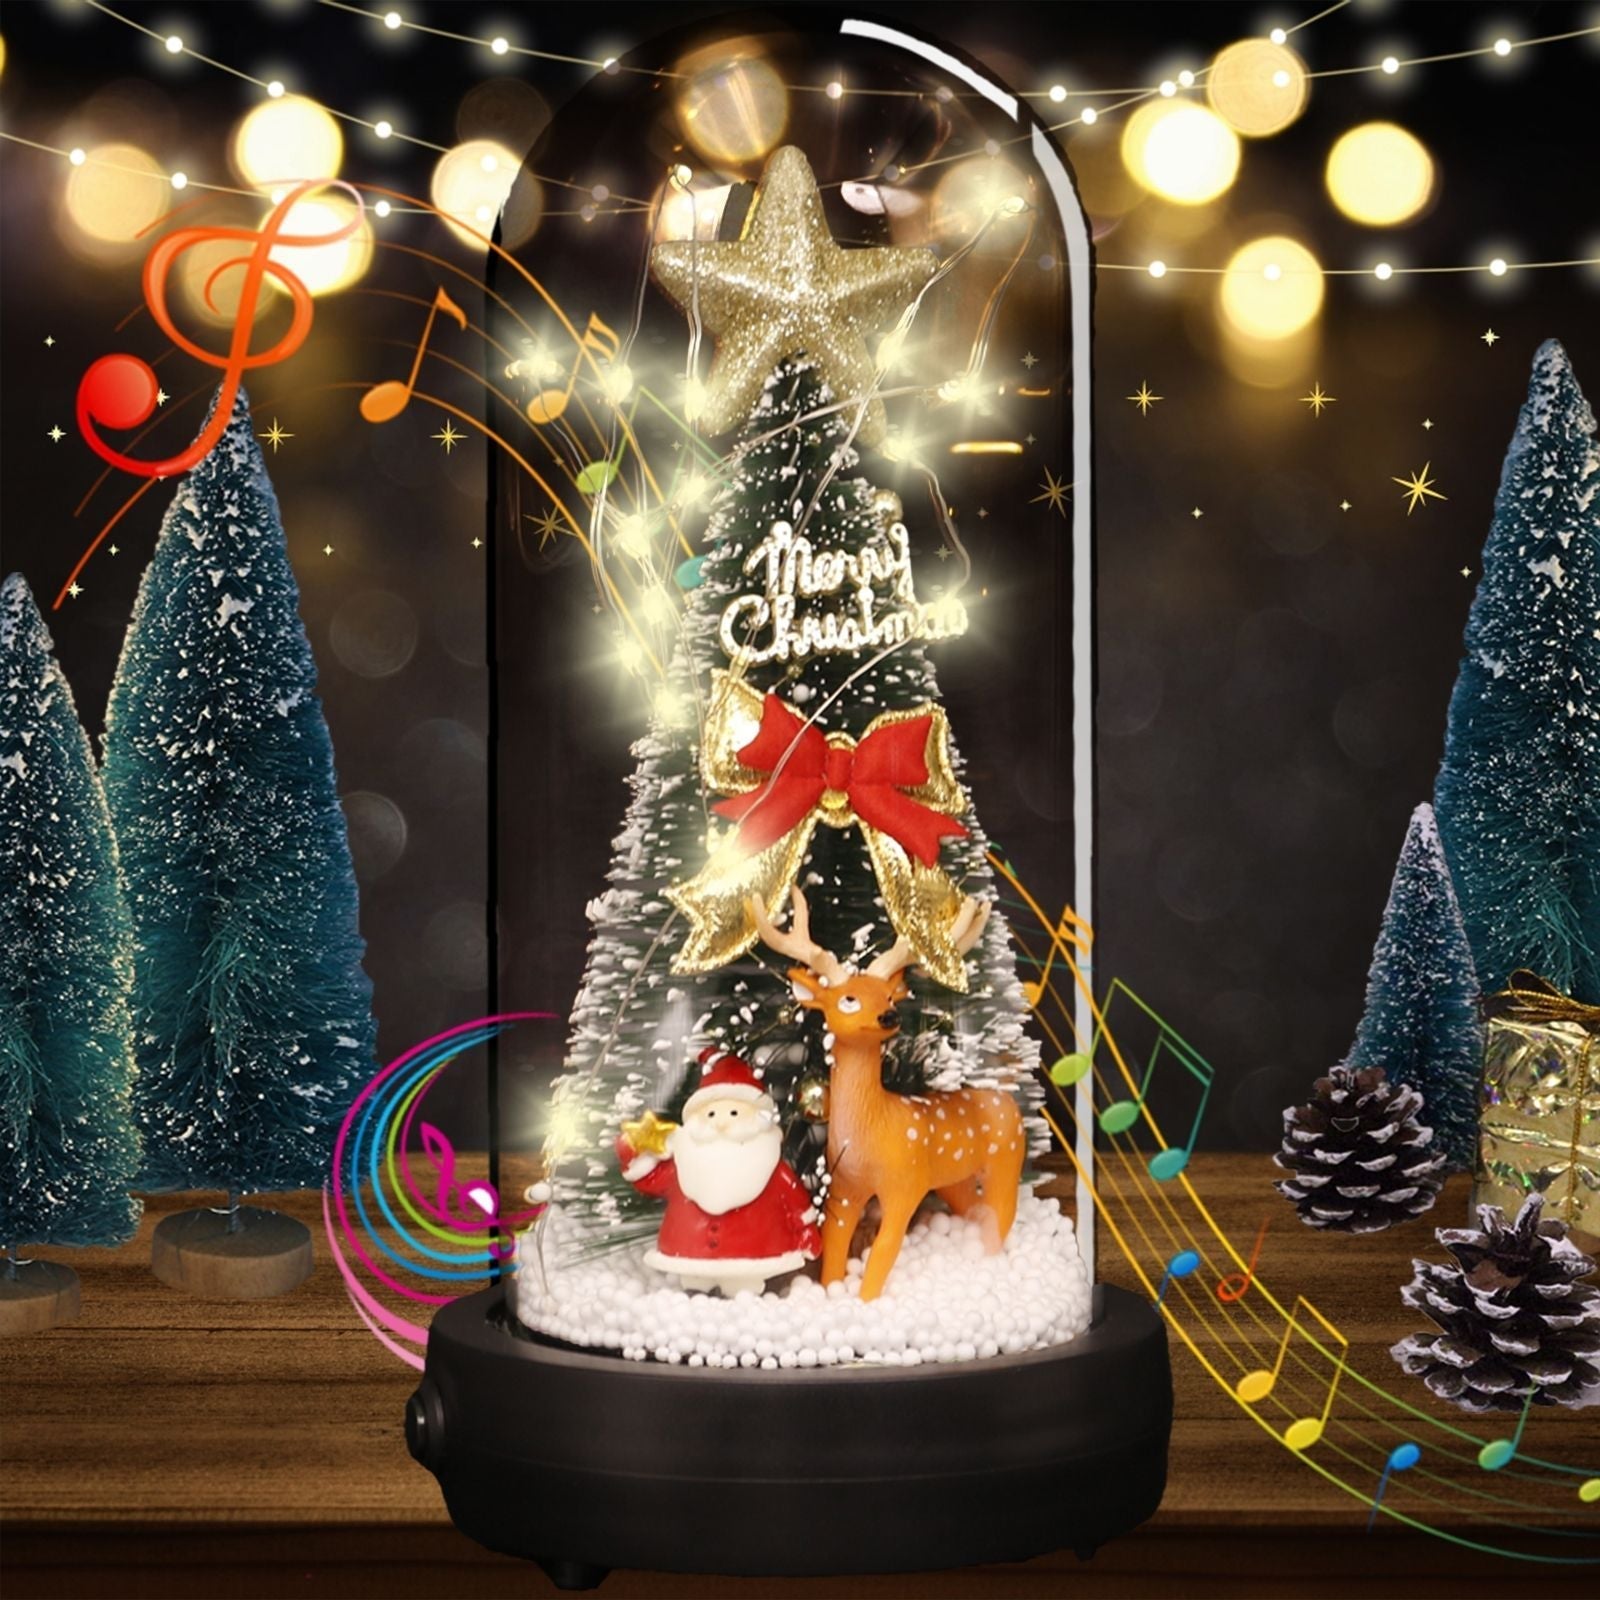 https://uniqicon.com/cdn/shop/products/uniqicon-led-christmas-tree-music-box-in-glass-dome-with-santa-claus-snowflakes-decorations-tree-present-indoor-home-decor-gifts-christmas-music-wooden-box-gift-640695.jpg?v=1696865904&width=1946